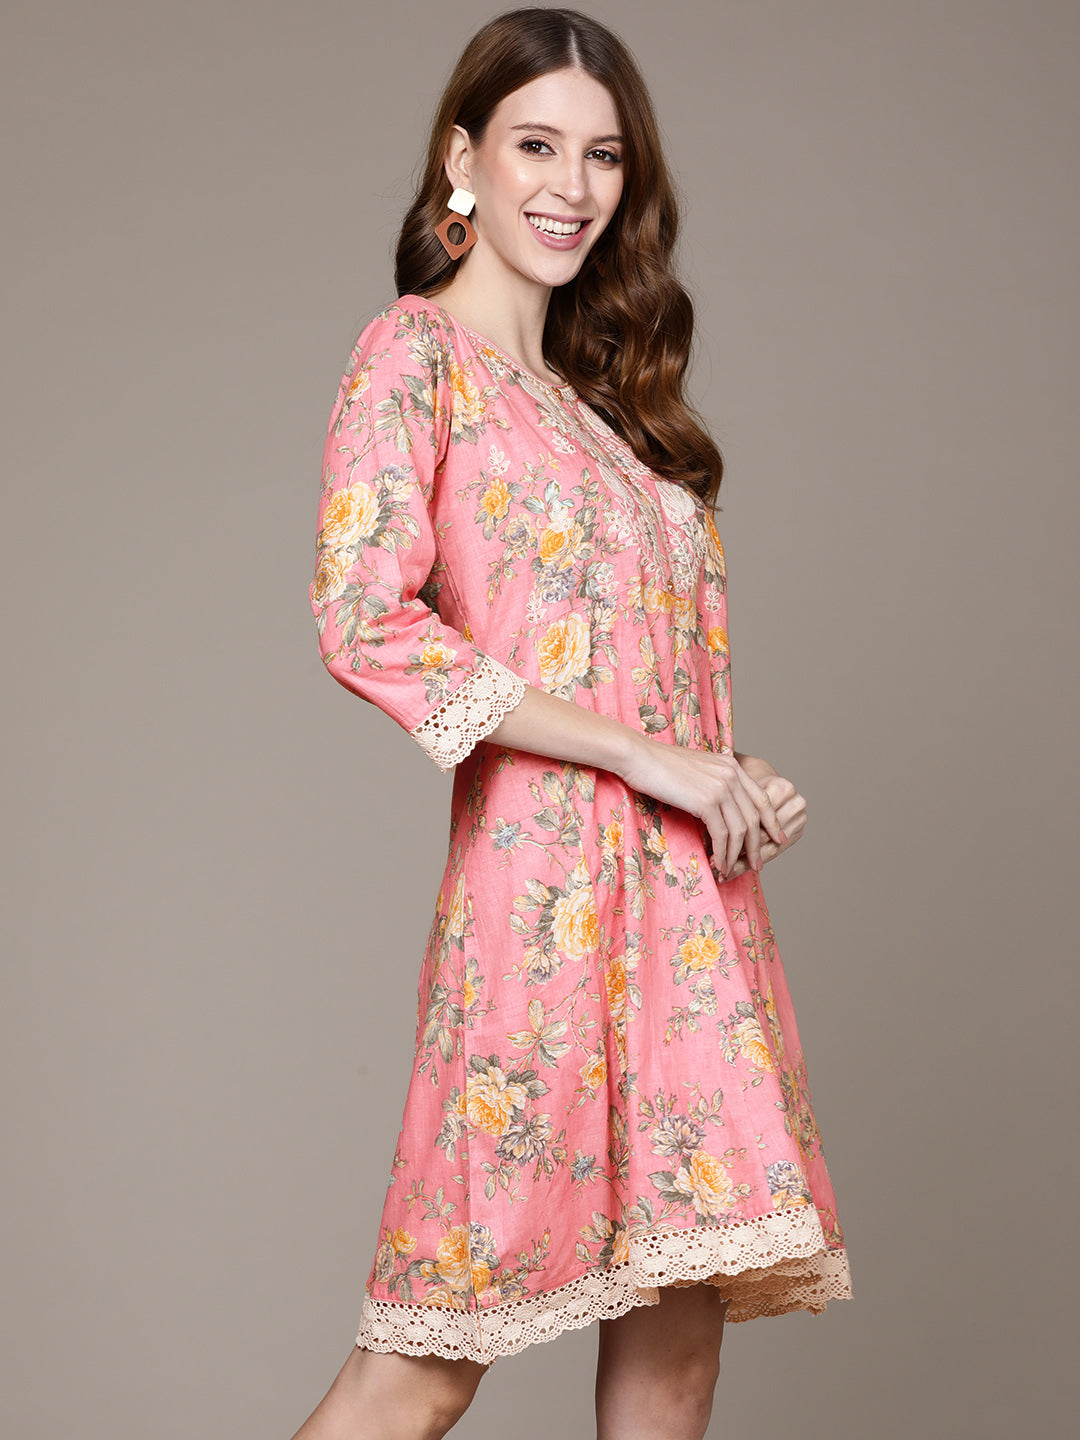 Ishin Women's Pink Embroidered A-Line Dress